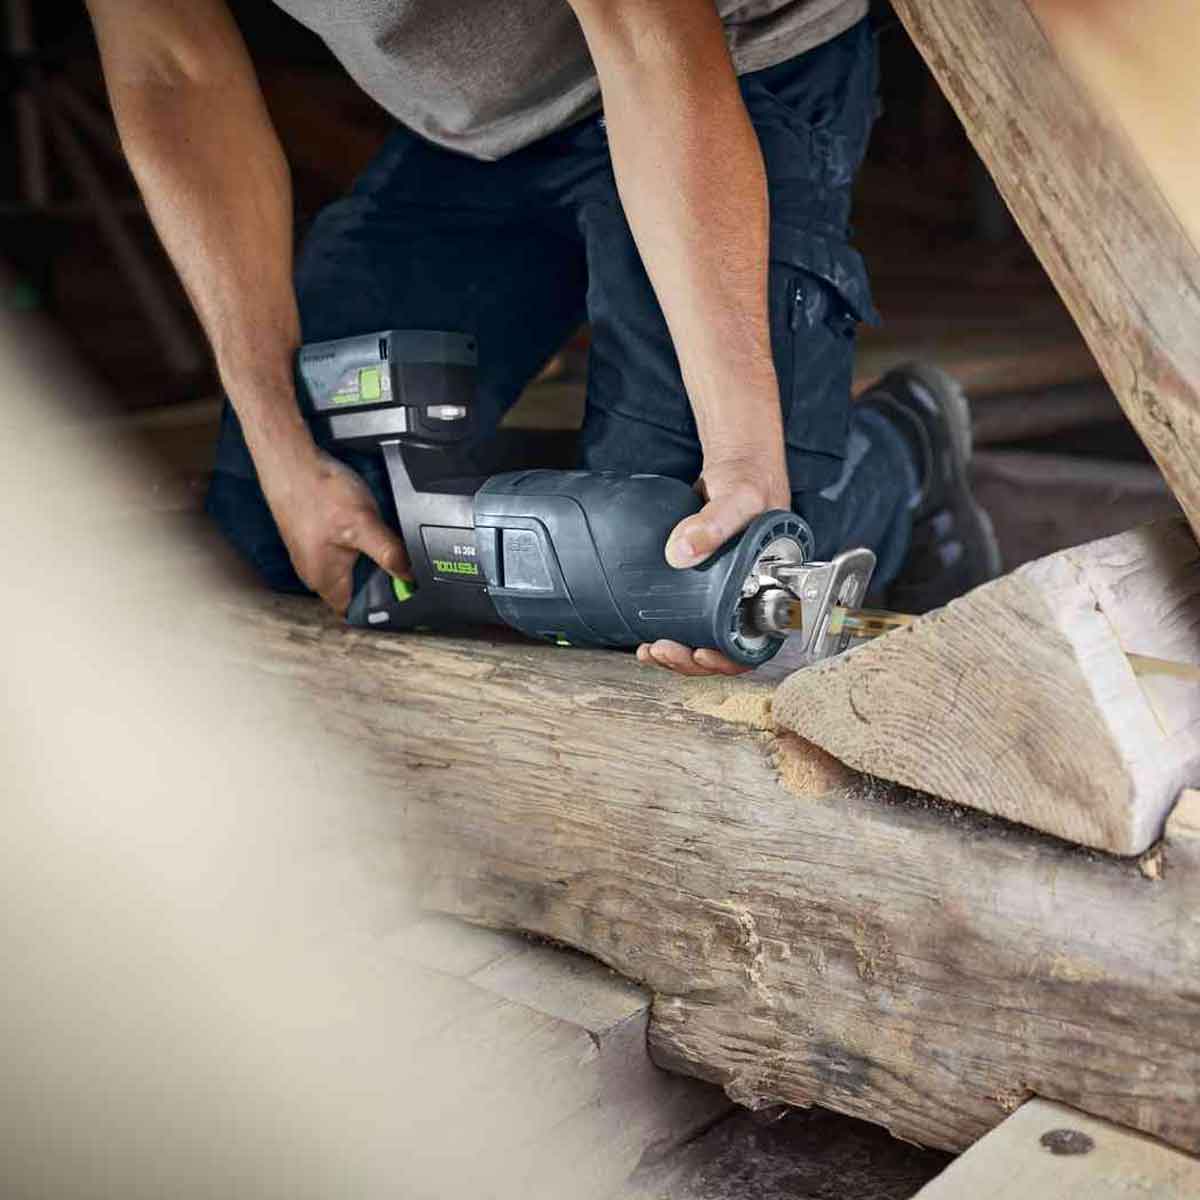 Festool RSC 18 EB-Basic 18V Brushless Reciprocating Saw - 576947 With 2 x 5.0Ah Bluetooth Batteries & Rapid Charger